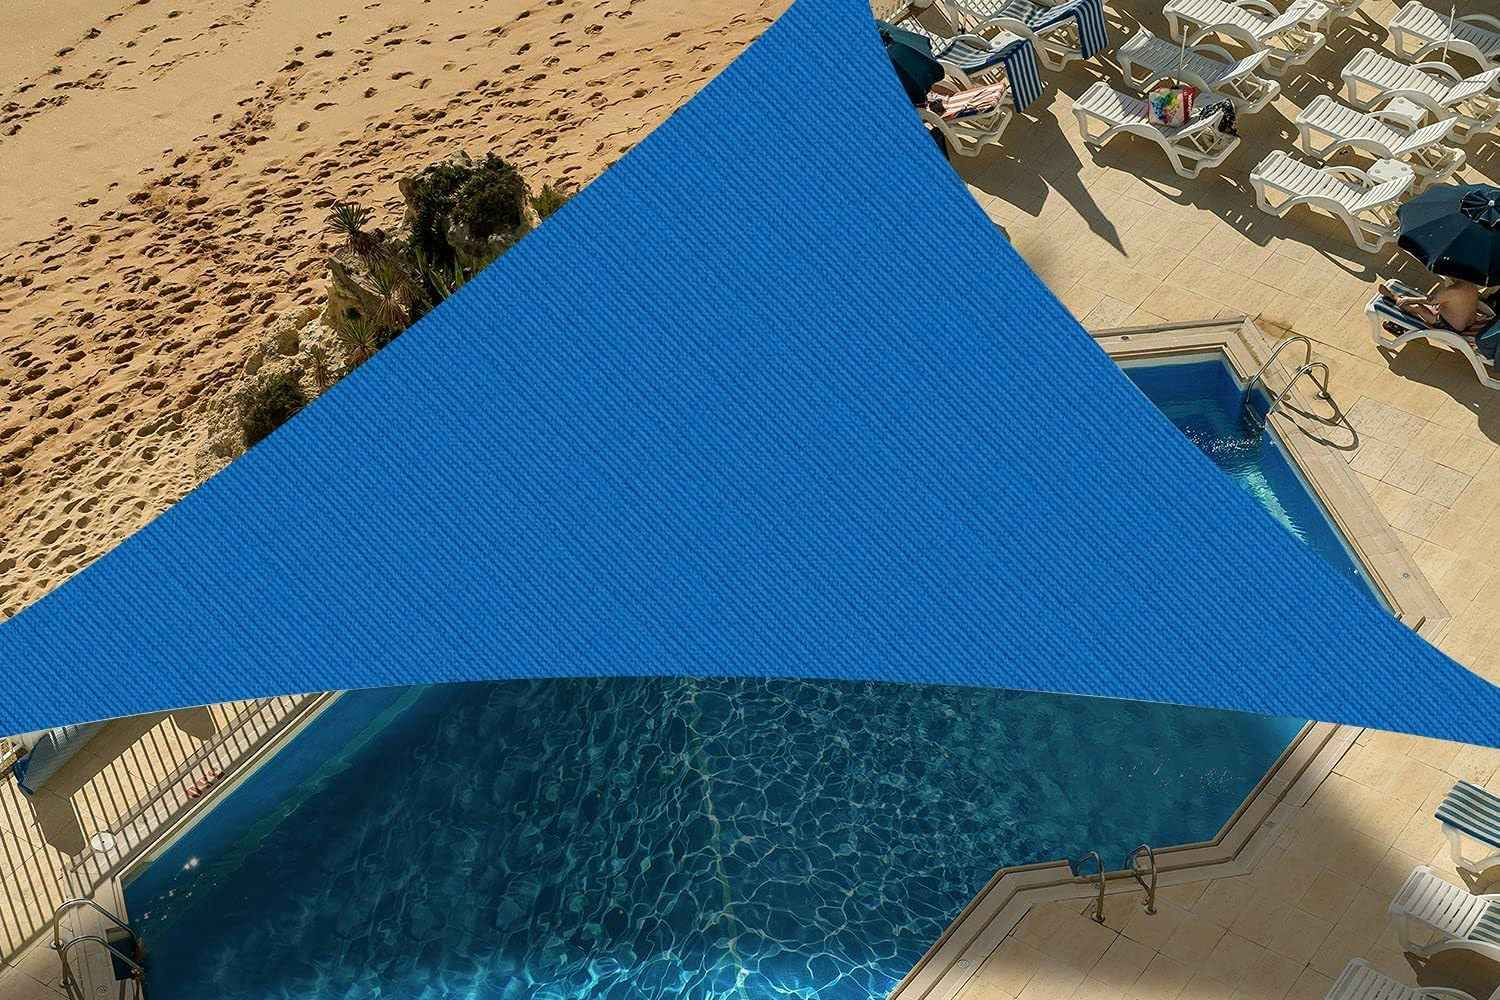 Score 80% Off This 10' x 10' x 10' Sun Shade Sail on Amazon — Pay $27